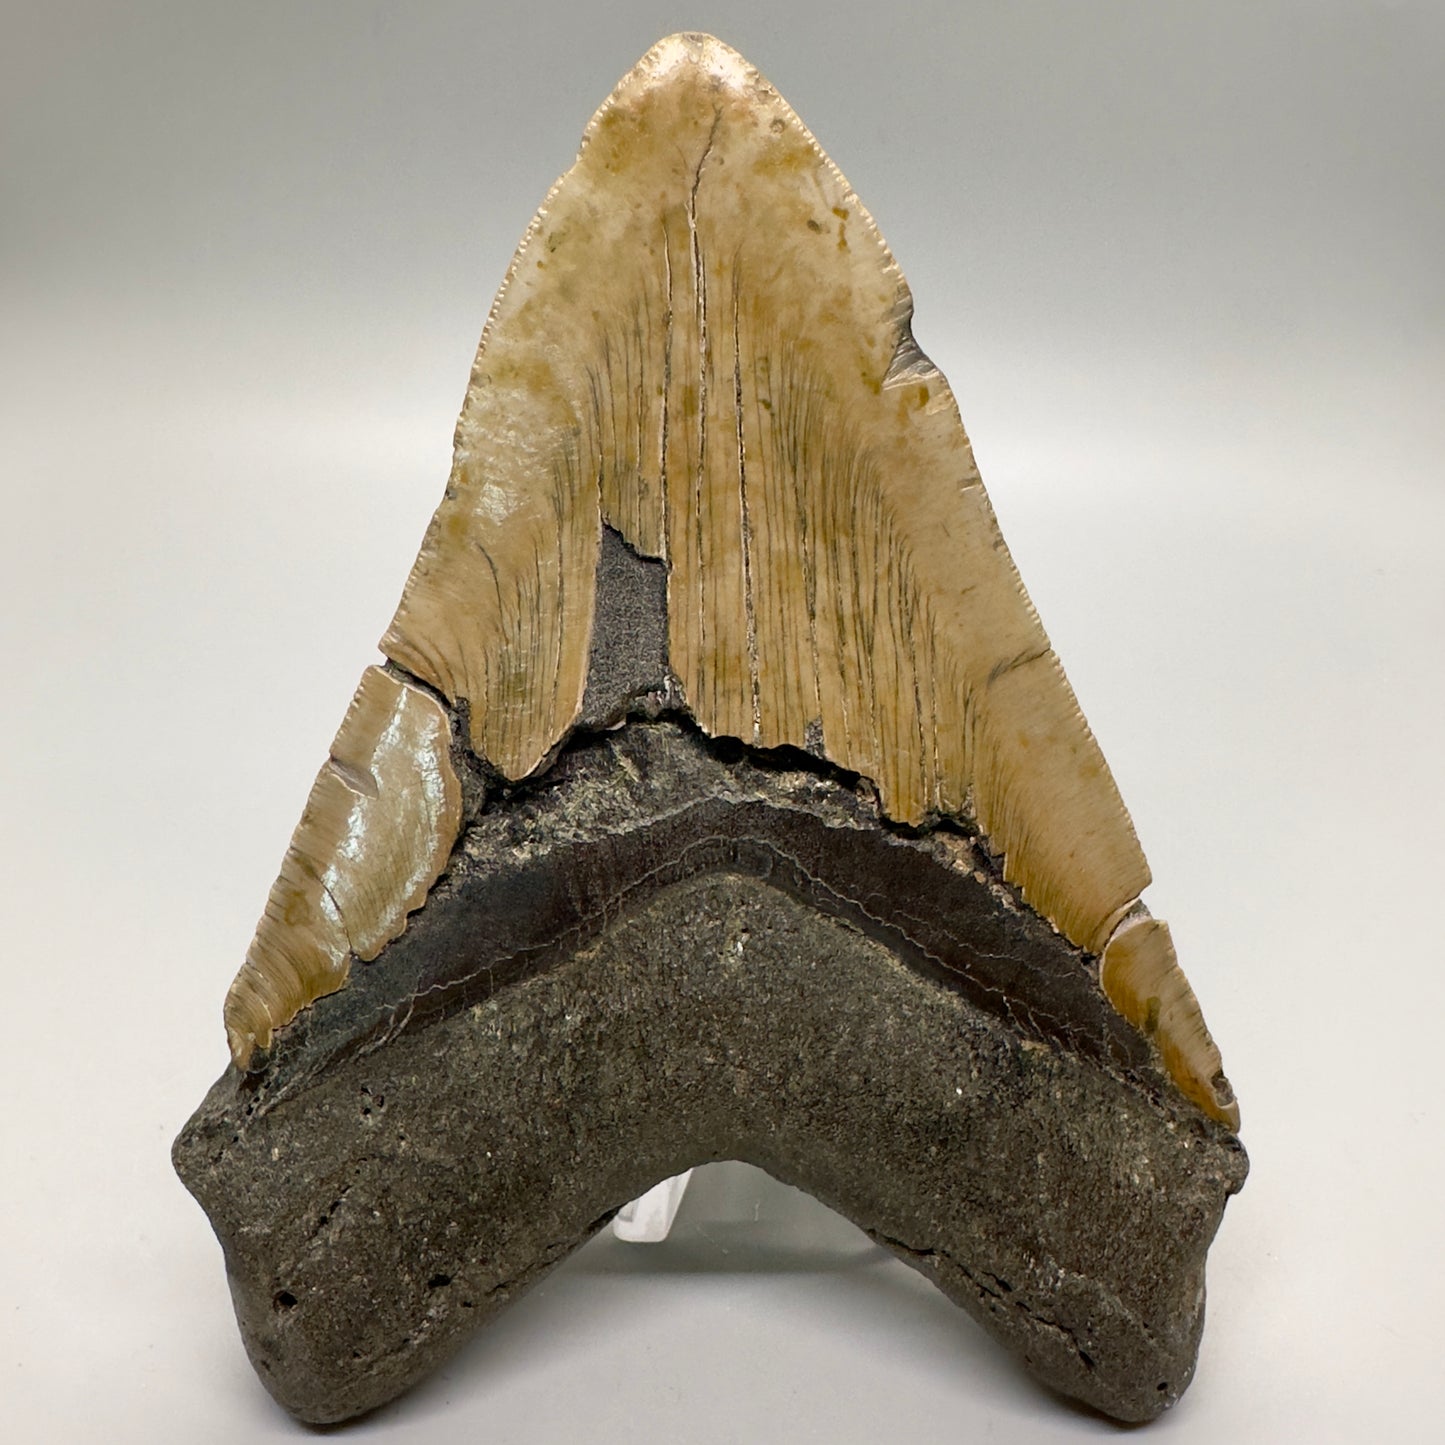 Colorful 5.61" Fossil Megalodon Shark Tooth - Wilmington North Carolina CM4630 - Back